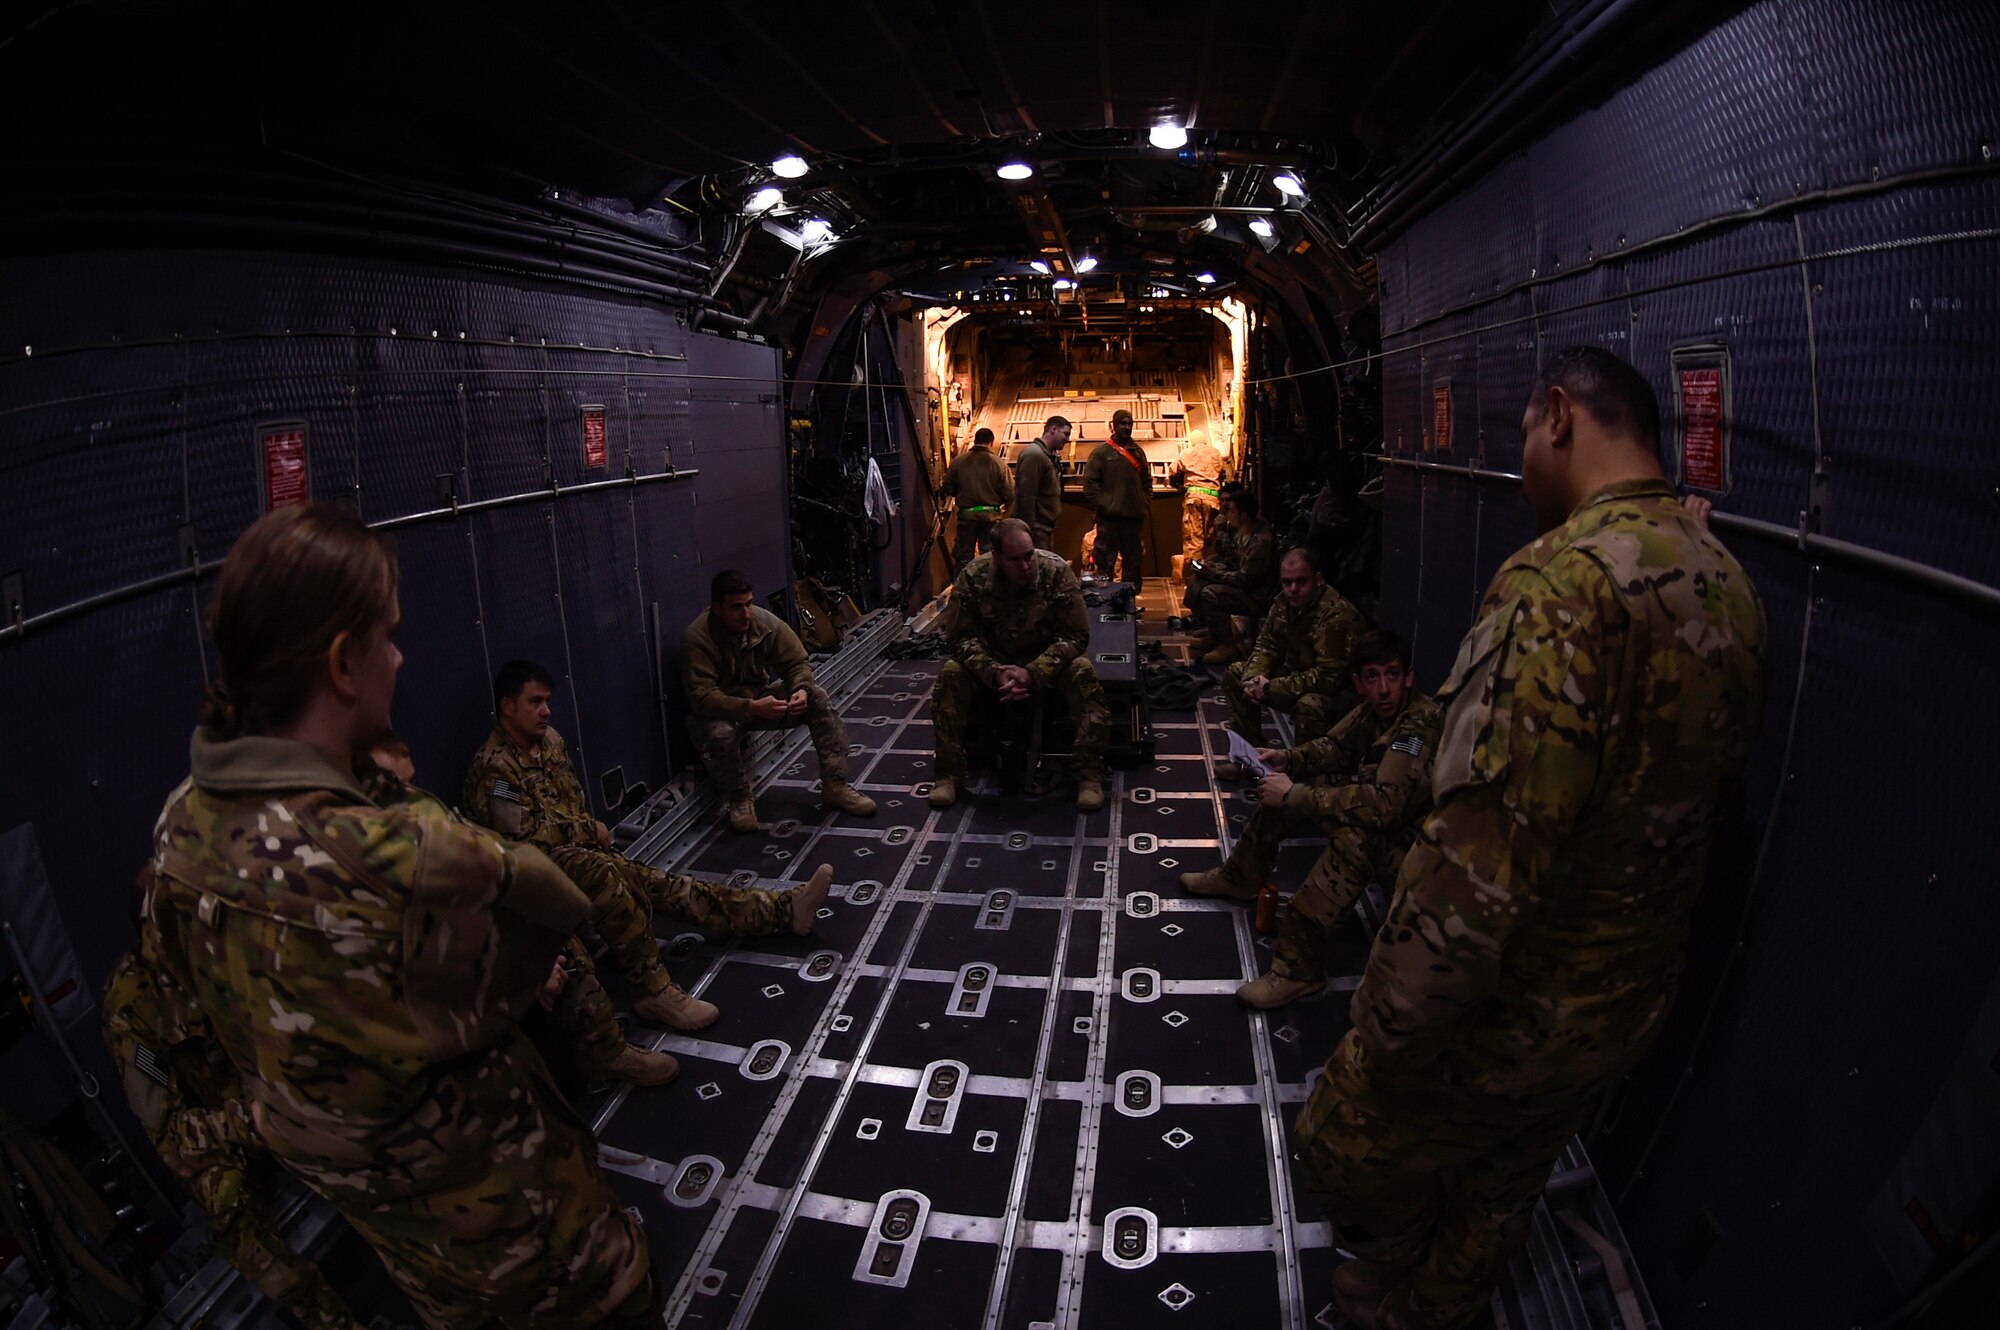 Airmen with the 15th Special Operations Squadron conduct a pre-mission briefing before a low-level night flight at Hill Air Force Base, Utah, Nov. 2, 2015. The exercise allowed Airmen to perform their duties in a simulated expeditionary environment outside of their home stations. (U.S. Air Force by Airman Kai White)